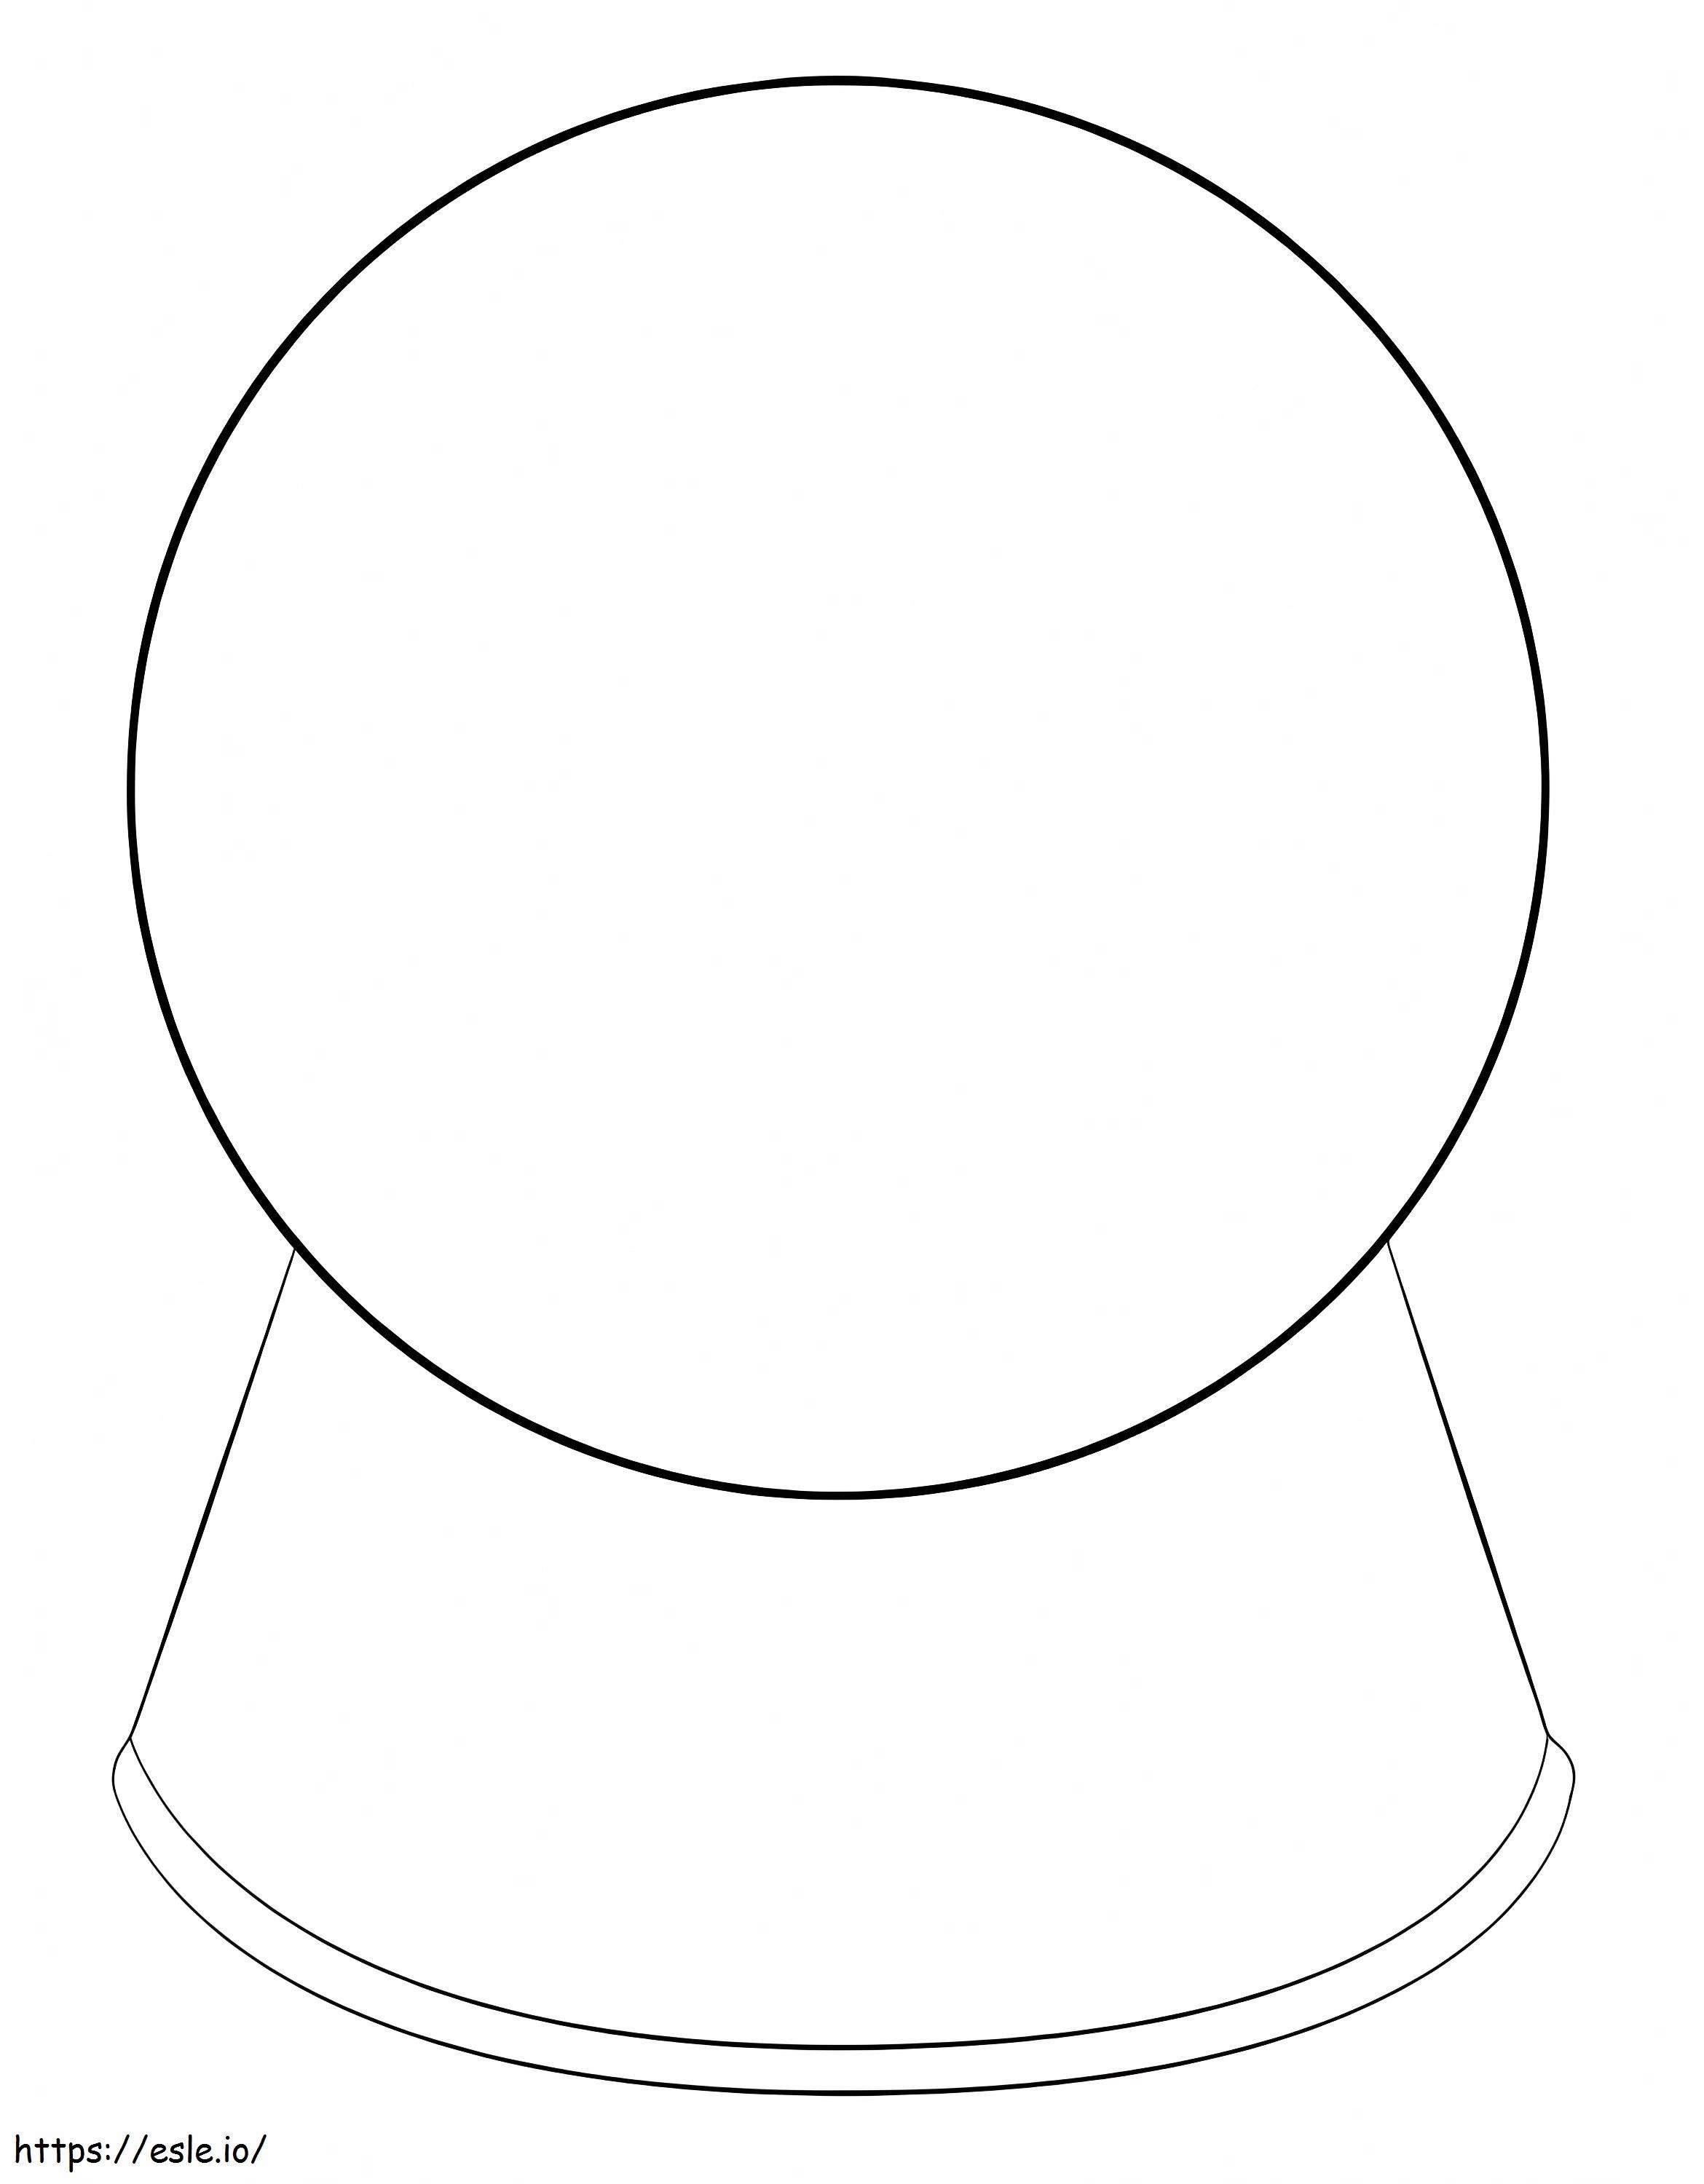 Very Simple Snow Globe coloring page